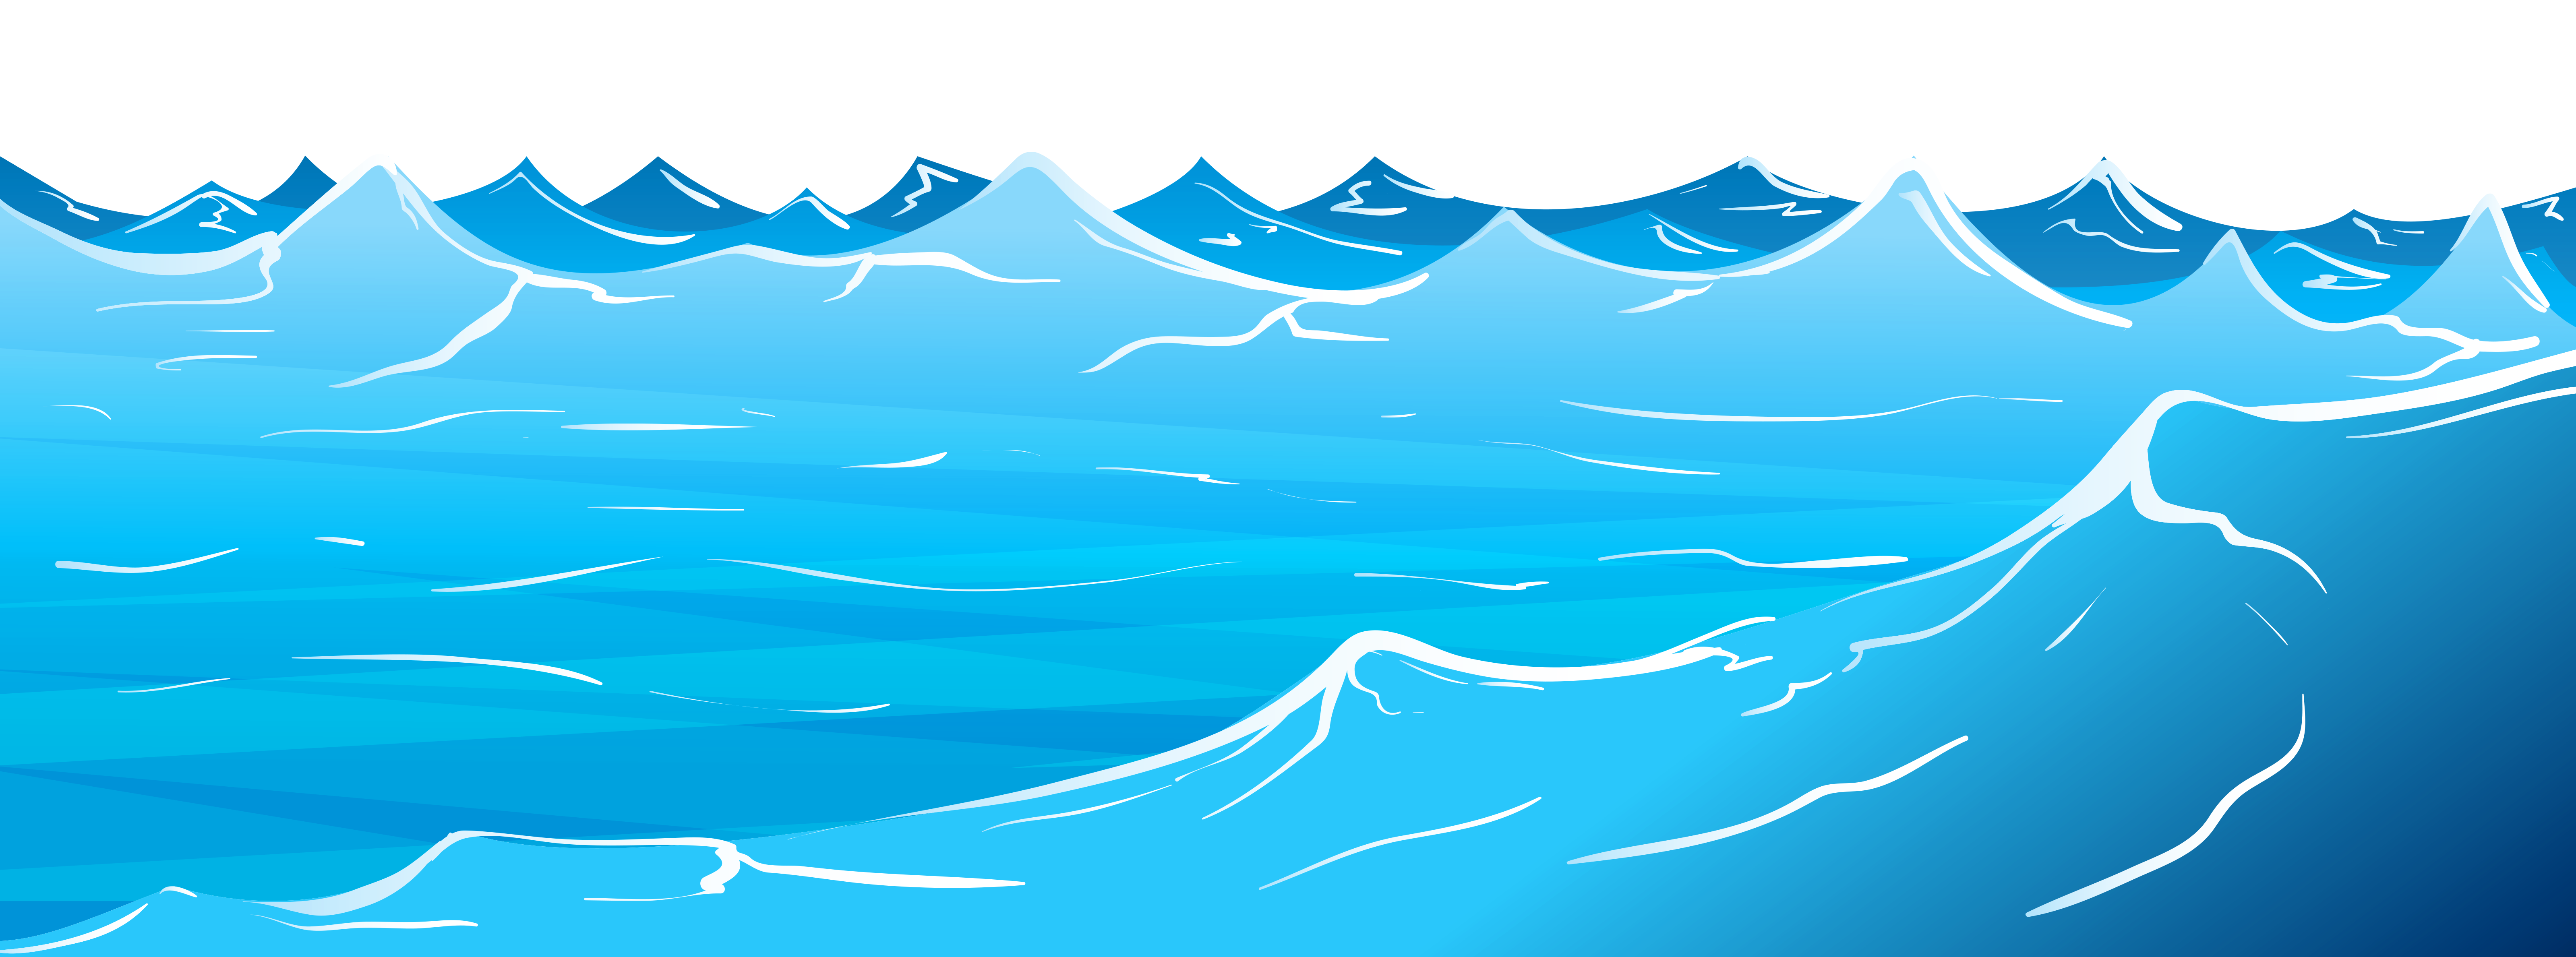 Clipart fire wave. What is in ocean